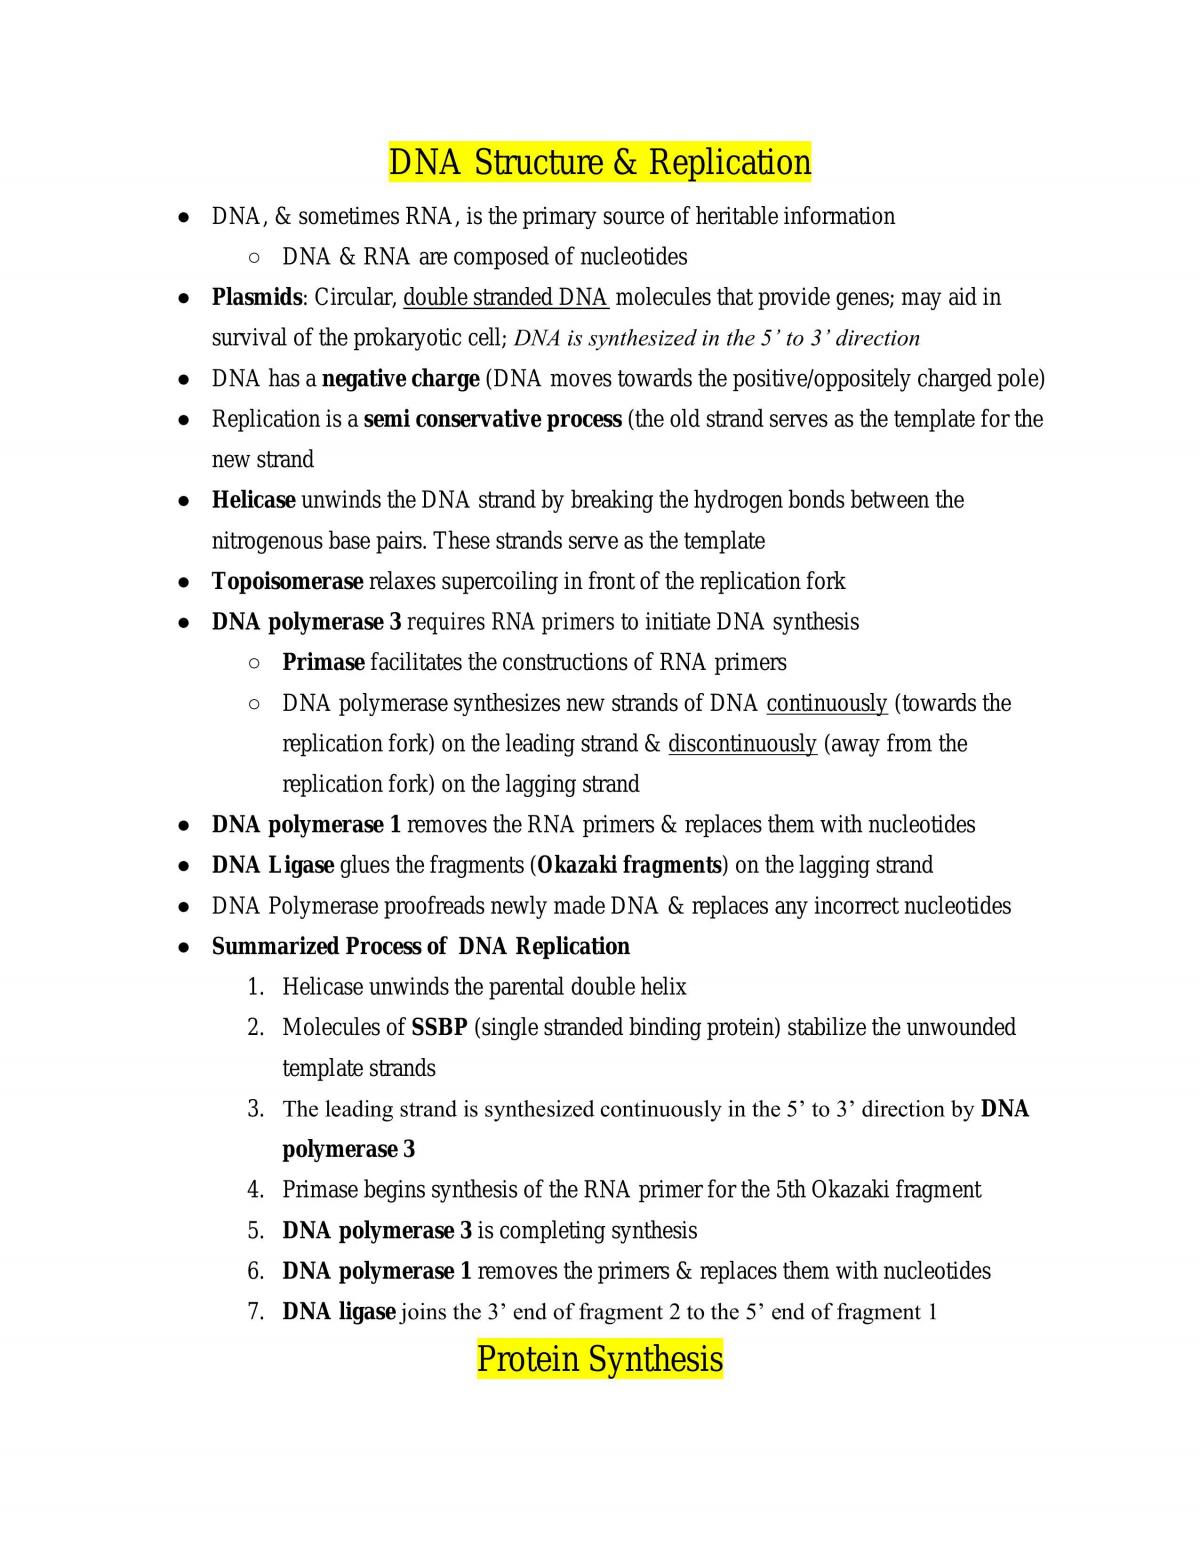 Biology 121 Study Notes - Page 20